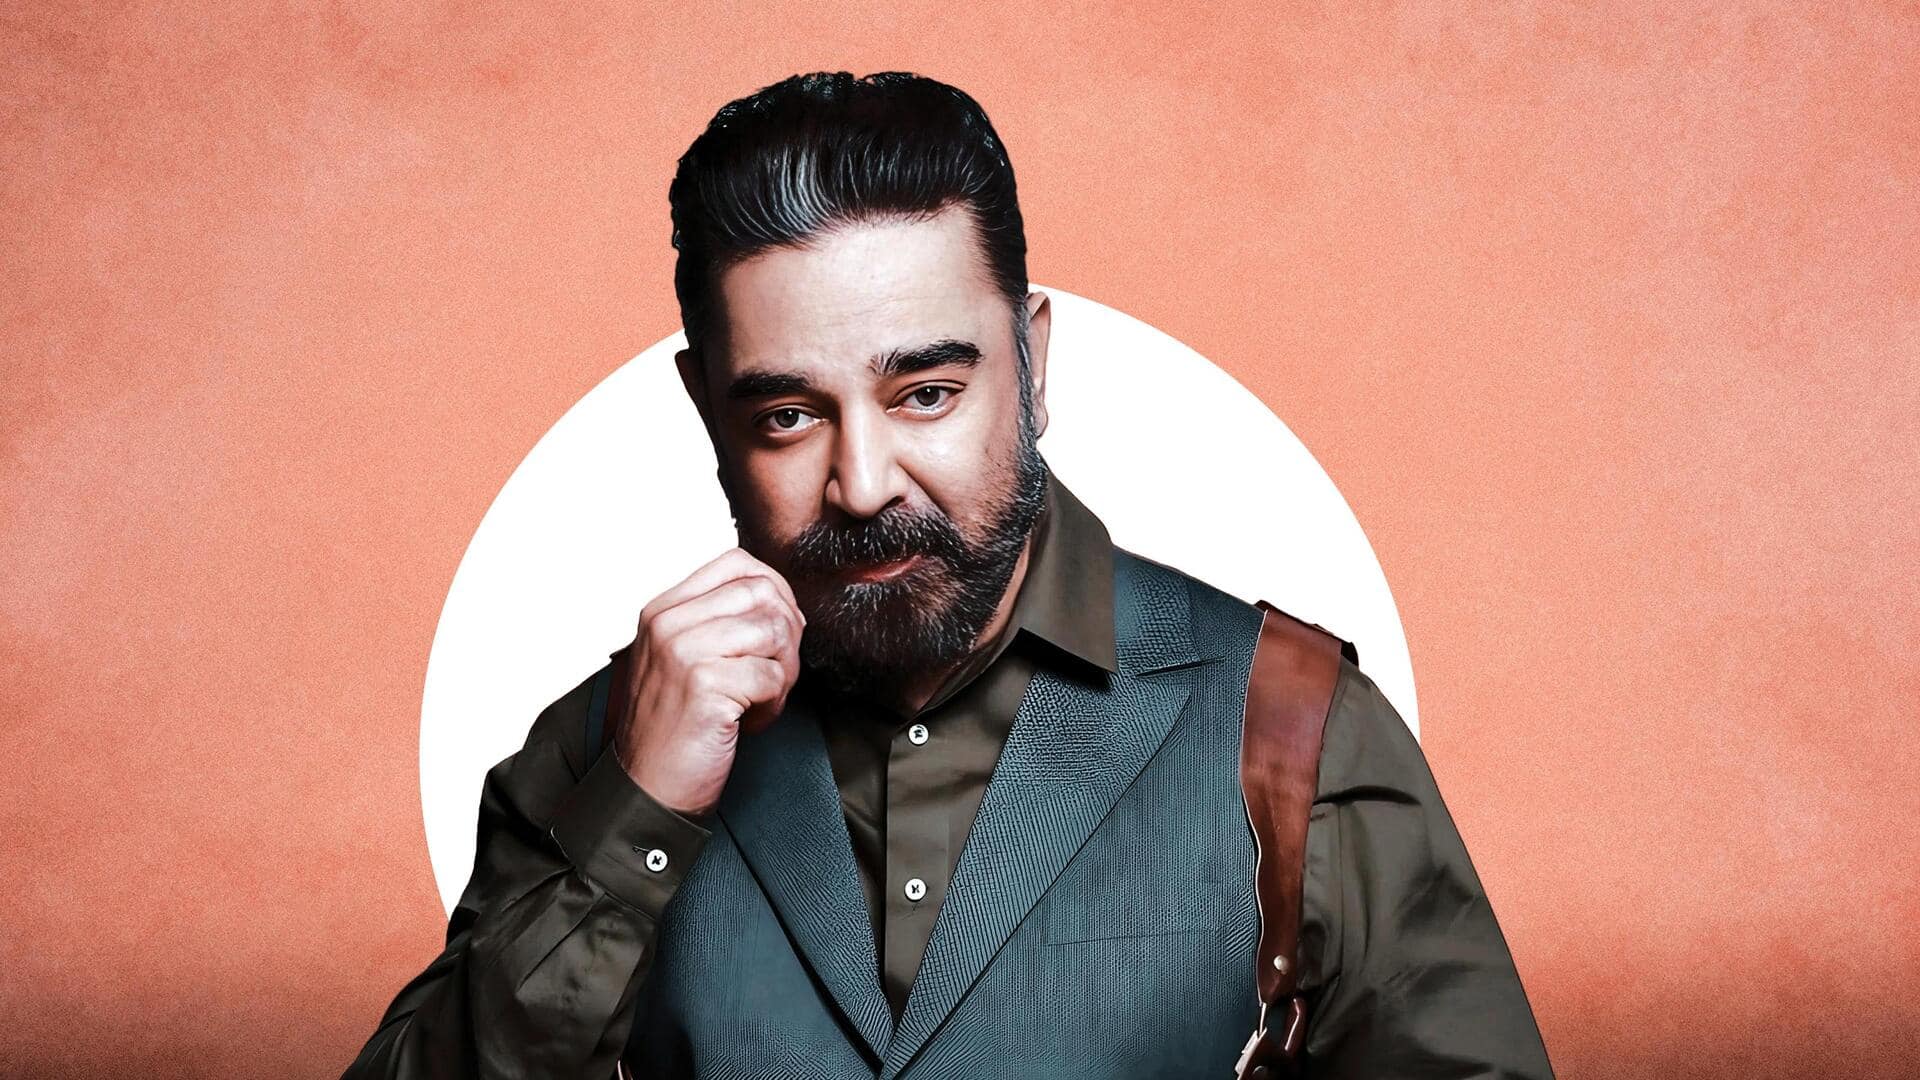 Kamal Haasan's 69th birthday: His most remarkable international honors, achievements